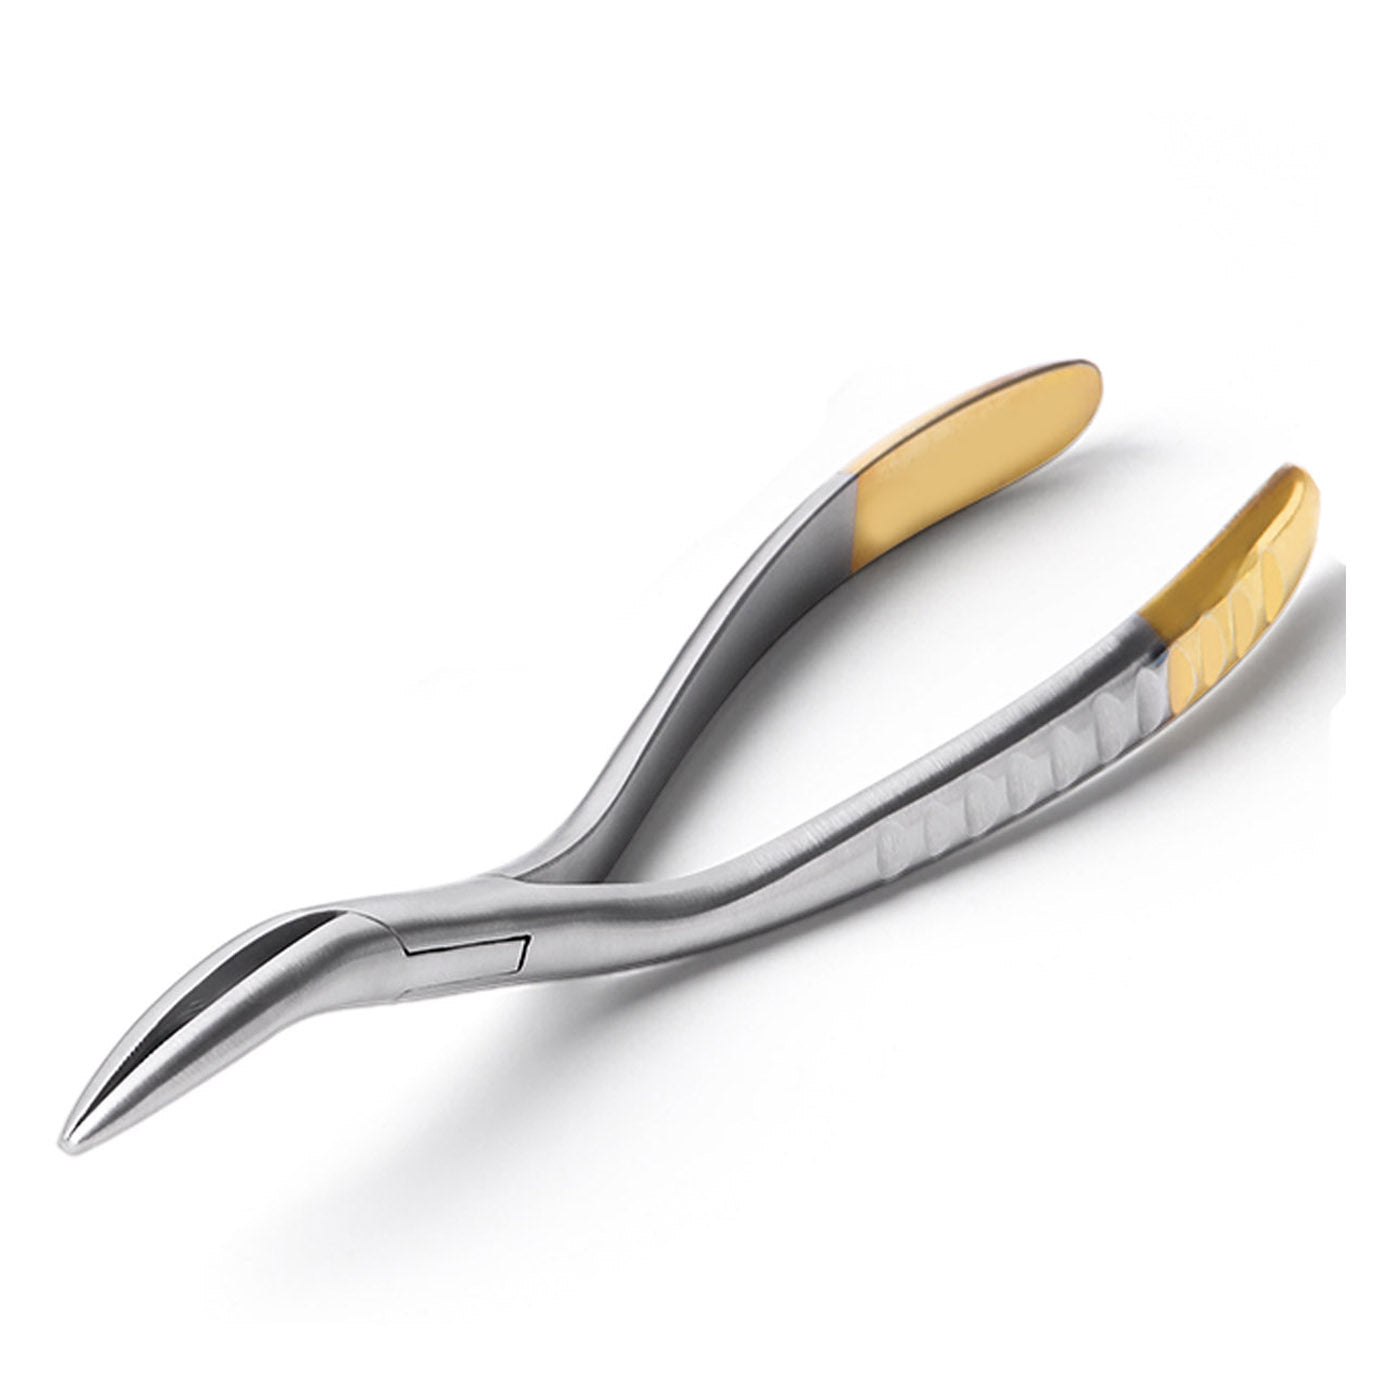 Azdent #3 Upper and Lower Teeth Root Fragment Minimally Invasive Extraction Forceps - azdentall.com